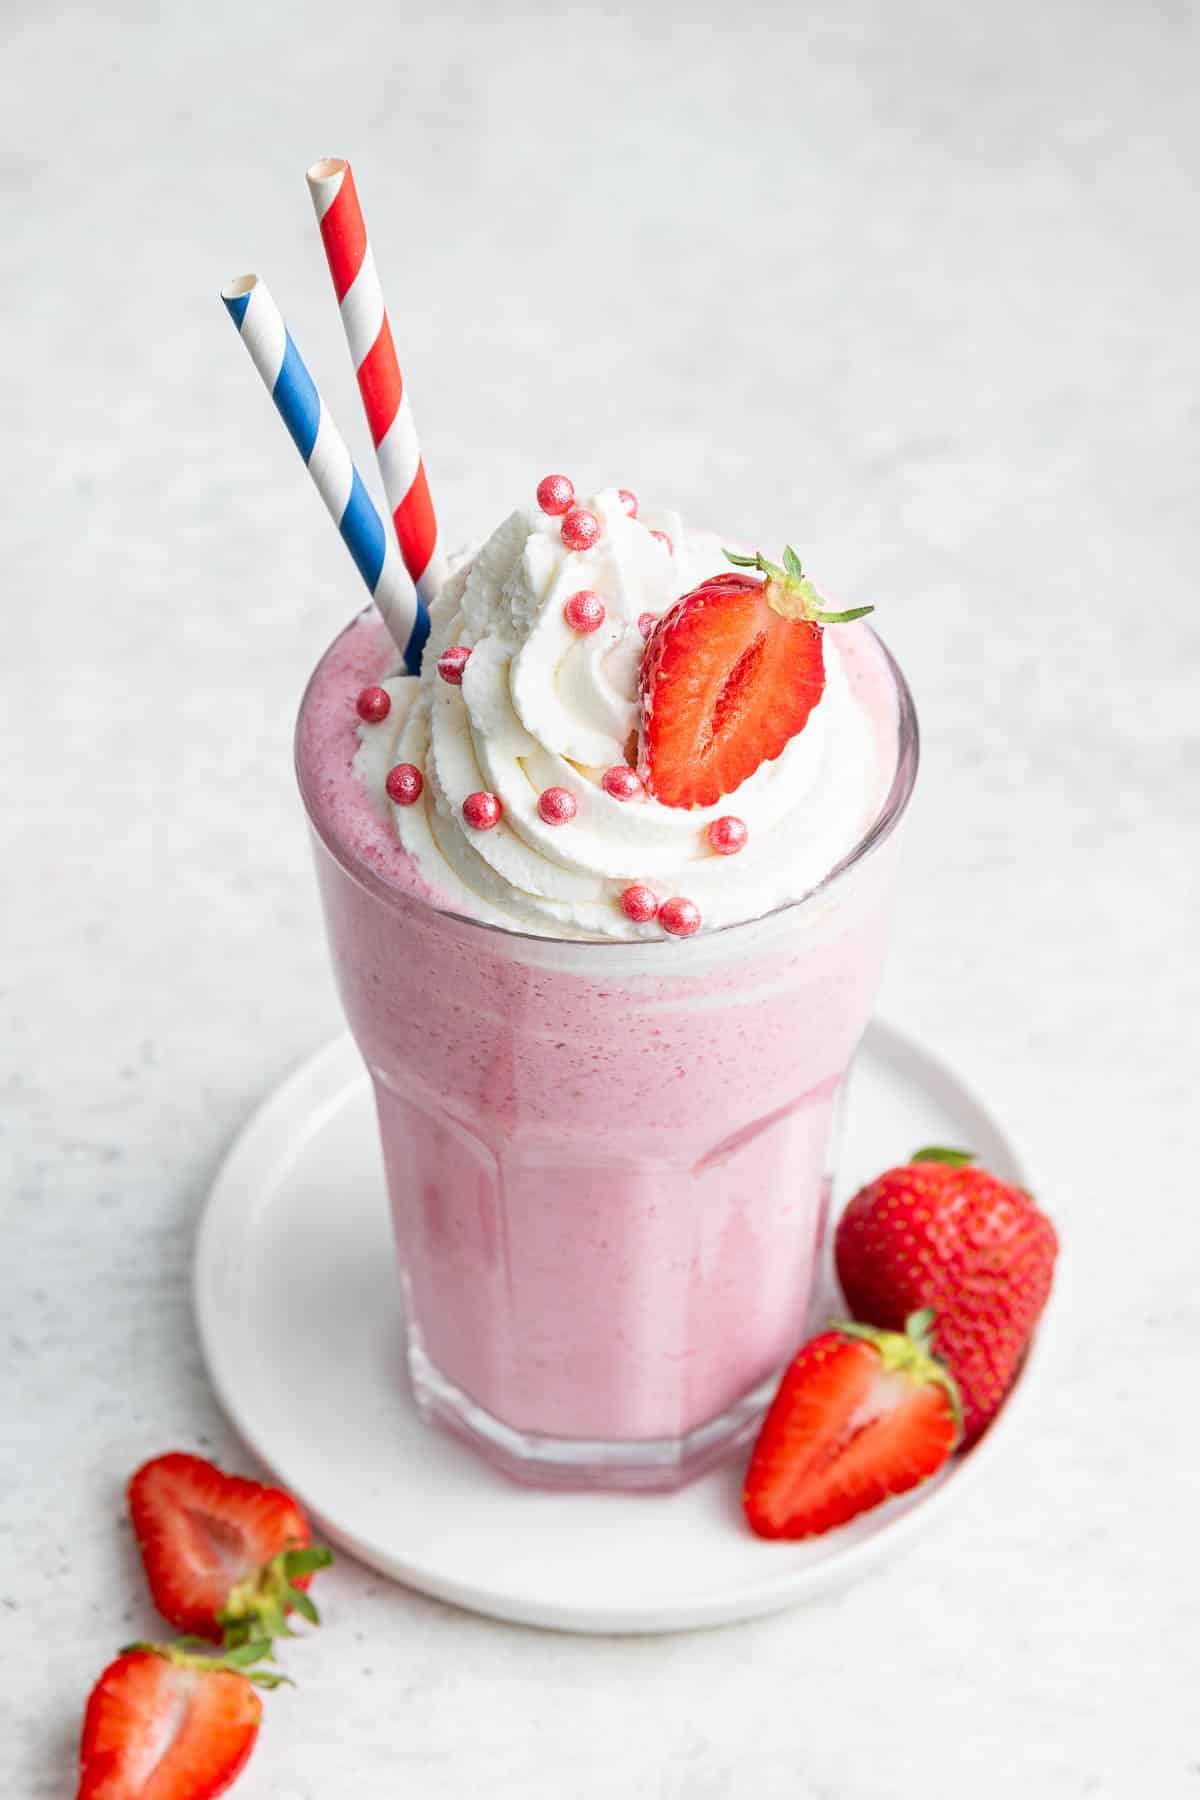 Best milkshake recipe for strawberries in a glass, garnished with 2 straws.